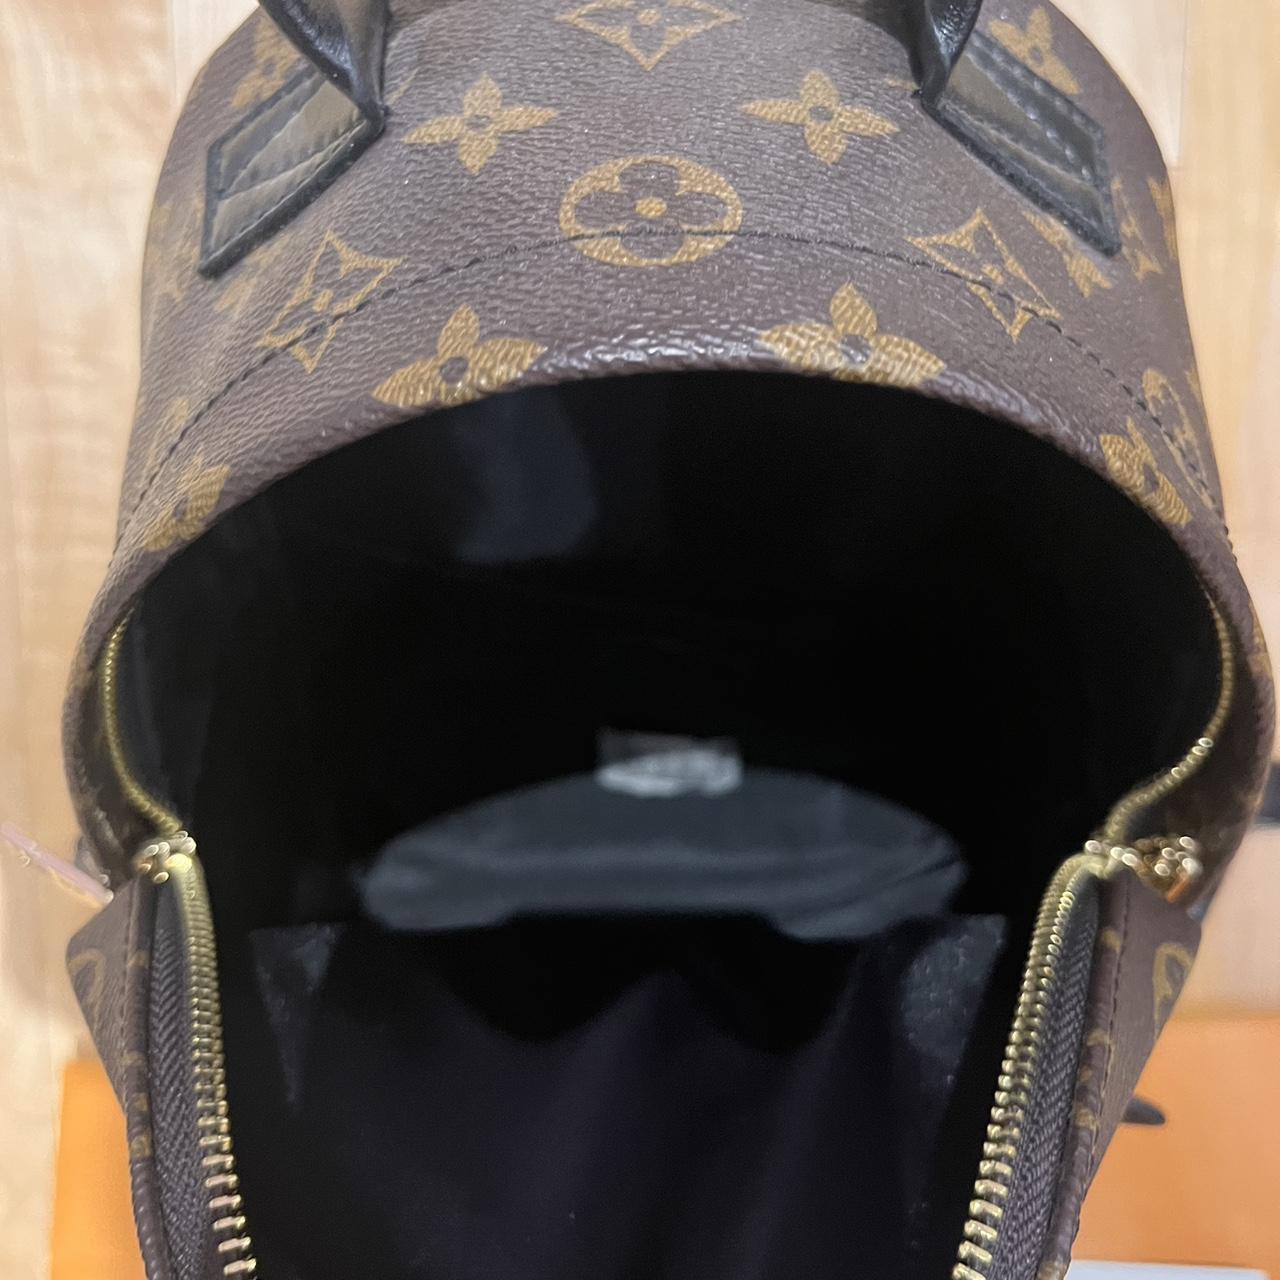 Louis Vuitton mini backpack Like new, received as a - Depop